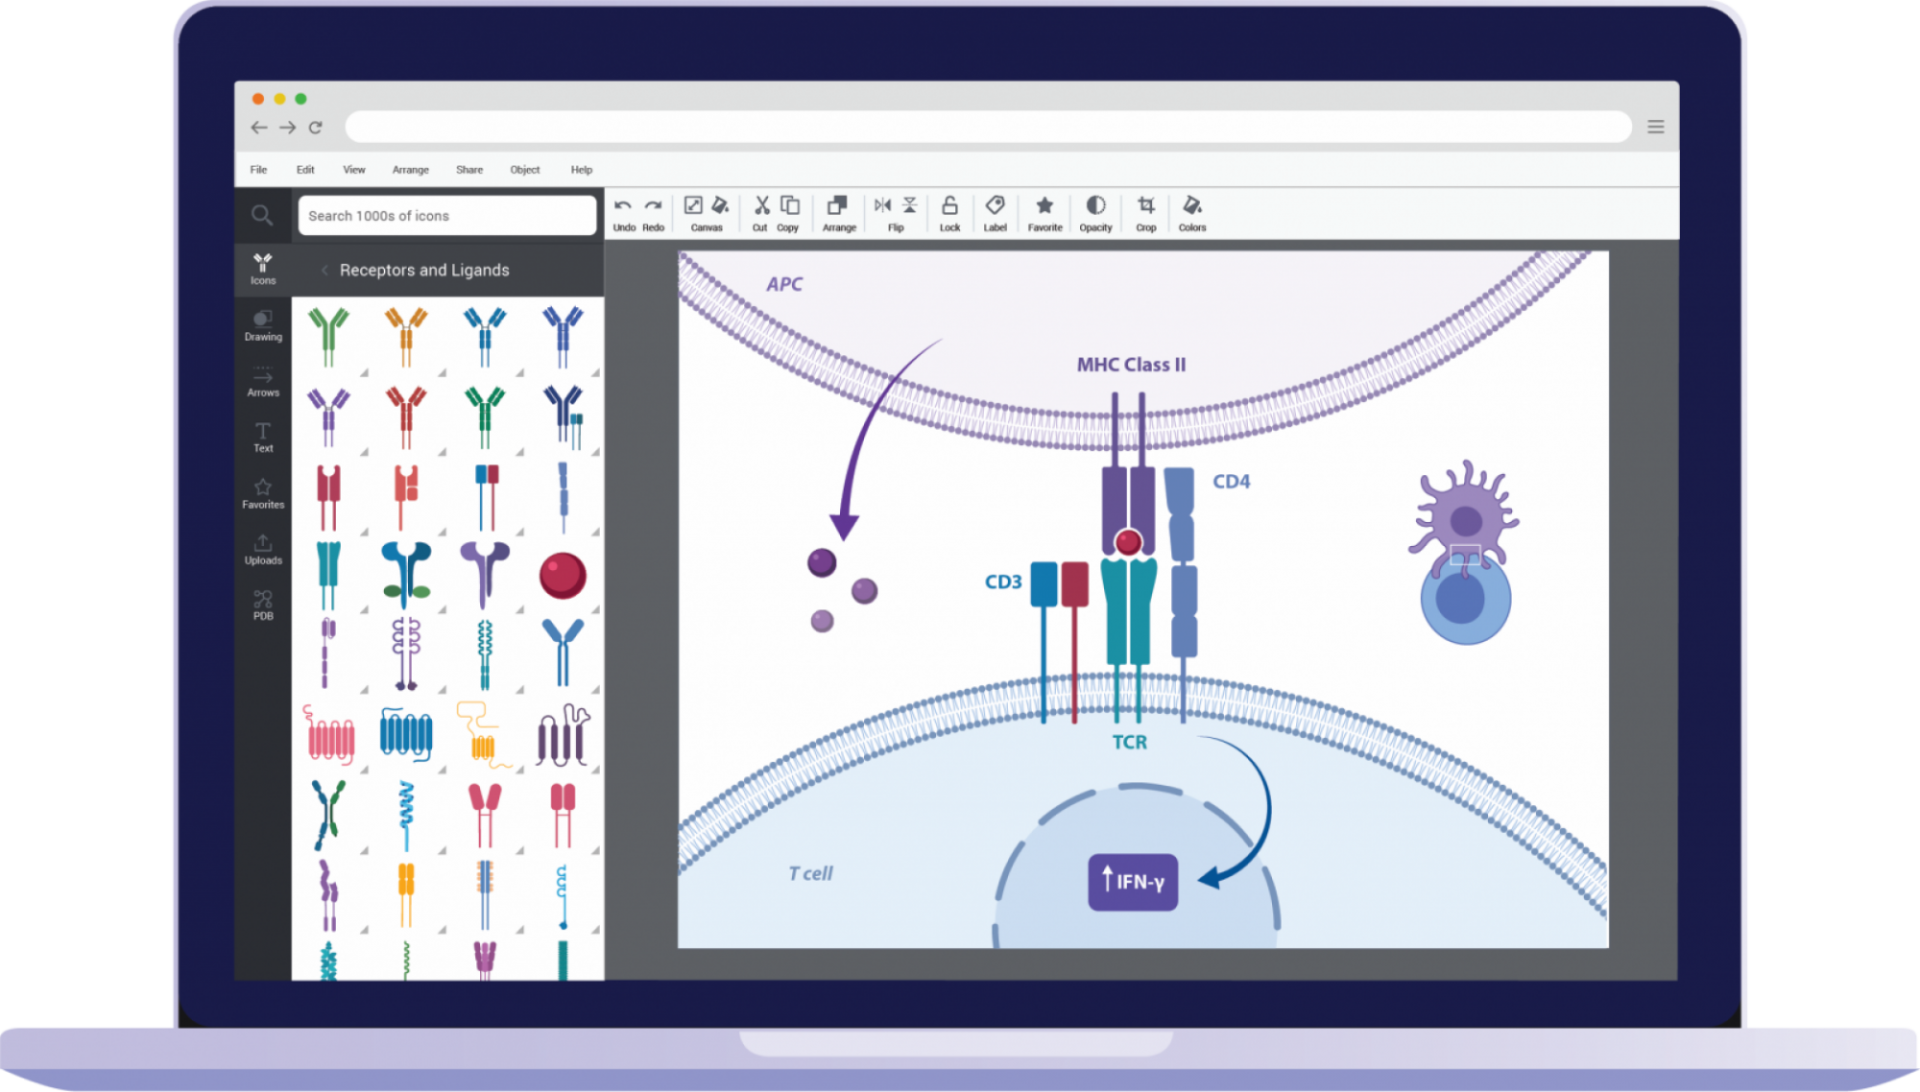 Stylized picture of a laptop with the BioRender application open and being used to depict an interaction between a T-cell and antigen-presenting cell.